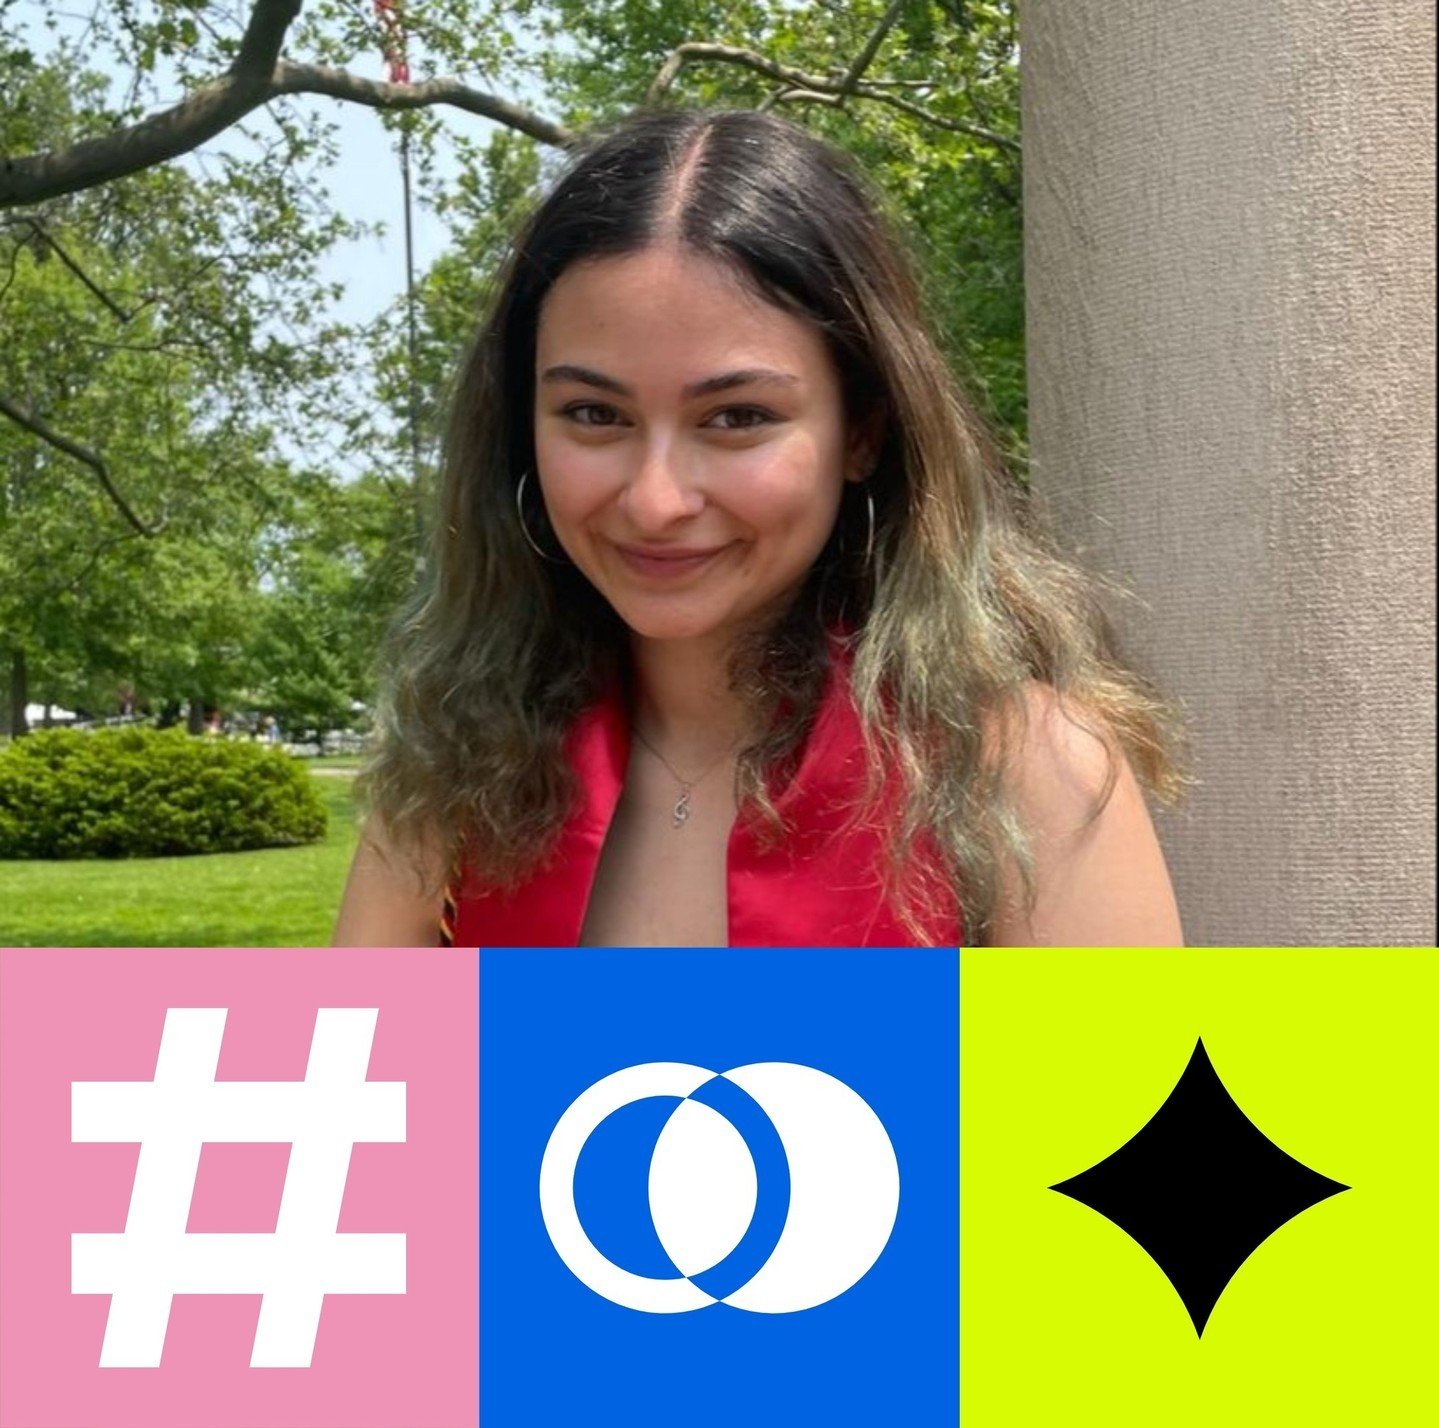 👋 Please meet &Ouml;z&uuml;m Pamuk&ccedil;u, founder of Heritage. She's Turkish, living in Berlin, Germany. 🇩🇪⁠
⁠
Previously in Istanbul, Oberlin, New York, and London. She studied Musiconomics, worked in VC, and somehow found herself on the other